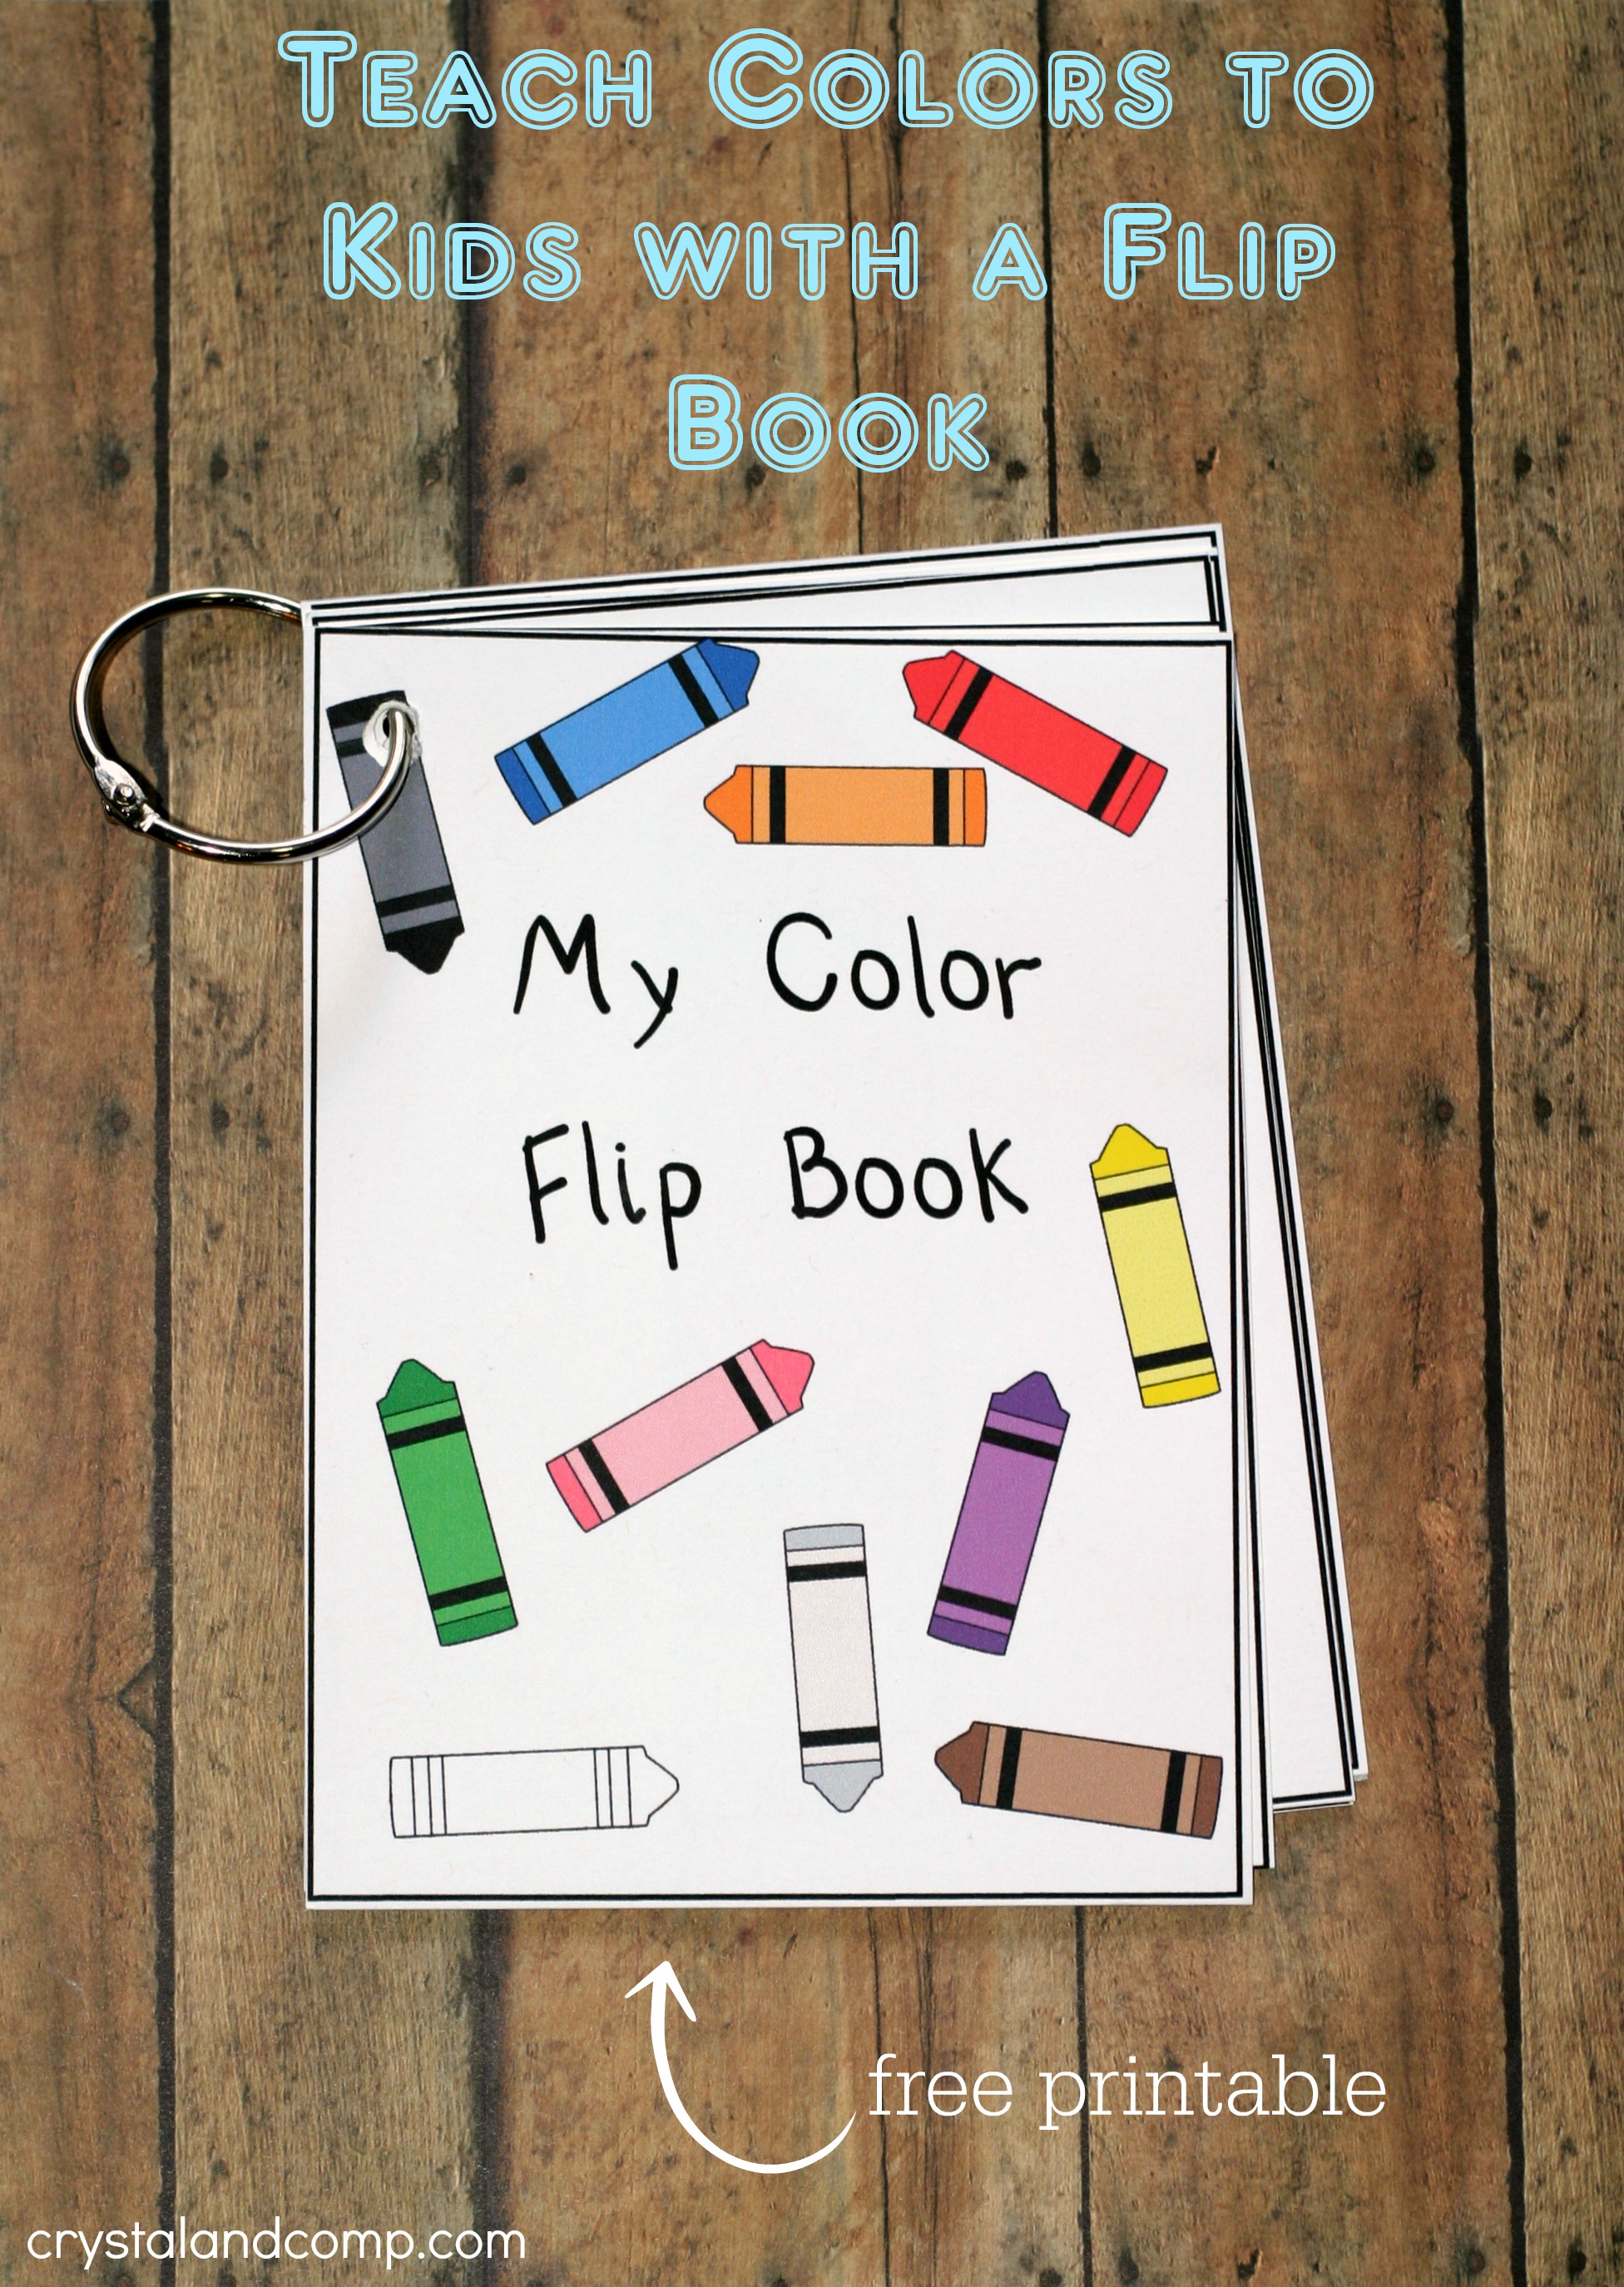 7-best-images-of-printable-books-to-teach-colors-free-printable-flip-books-for-kids-with-color